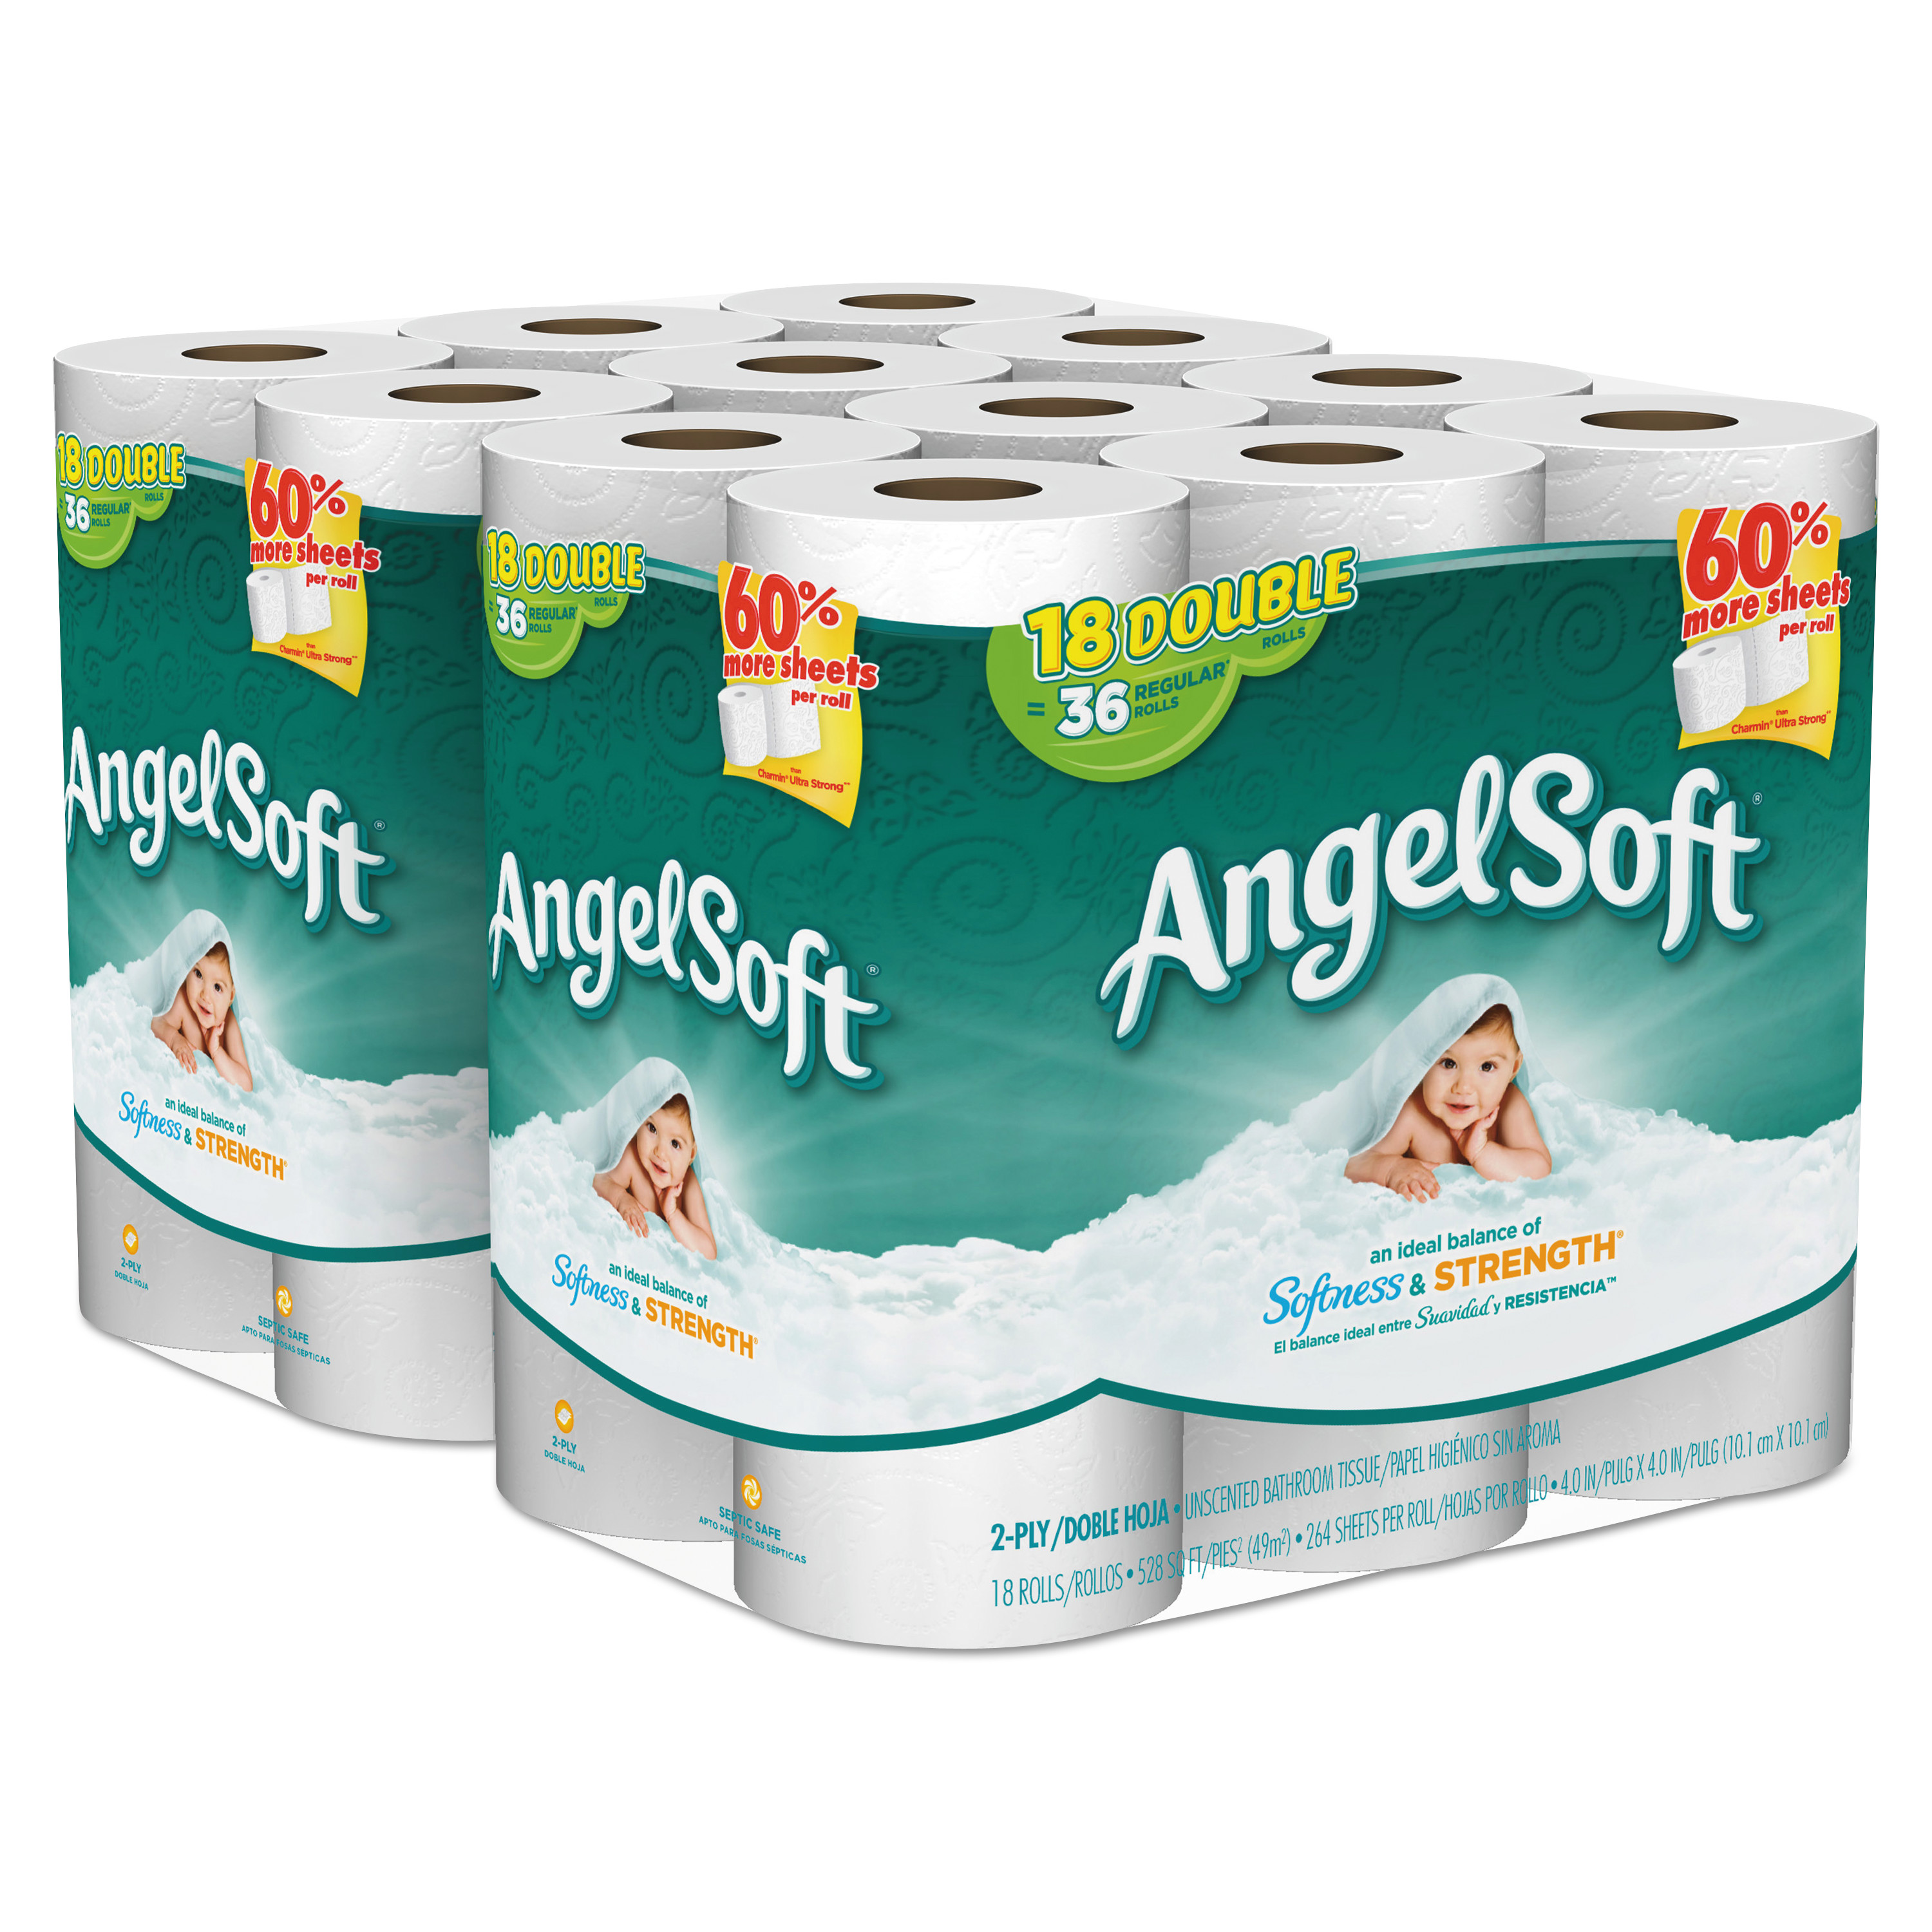 Double-Roll Bathroom Tissue, 2-Ply, White, 264 Sheets/Roll, 18/Pk, 2 Pks/Ct